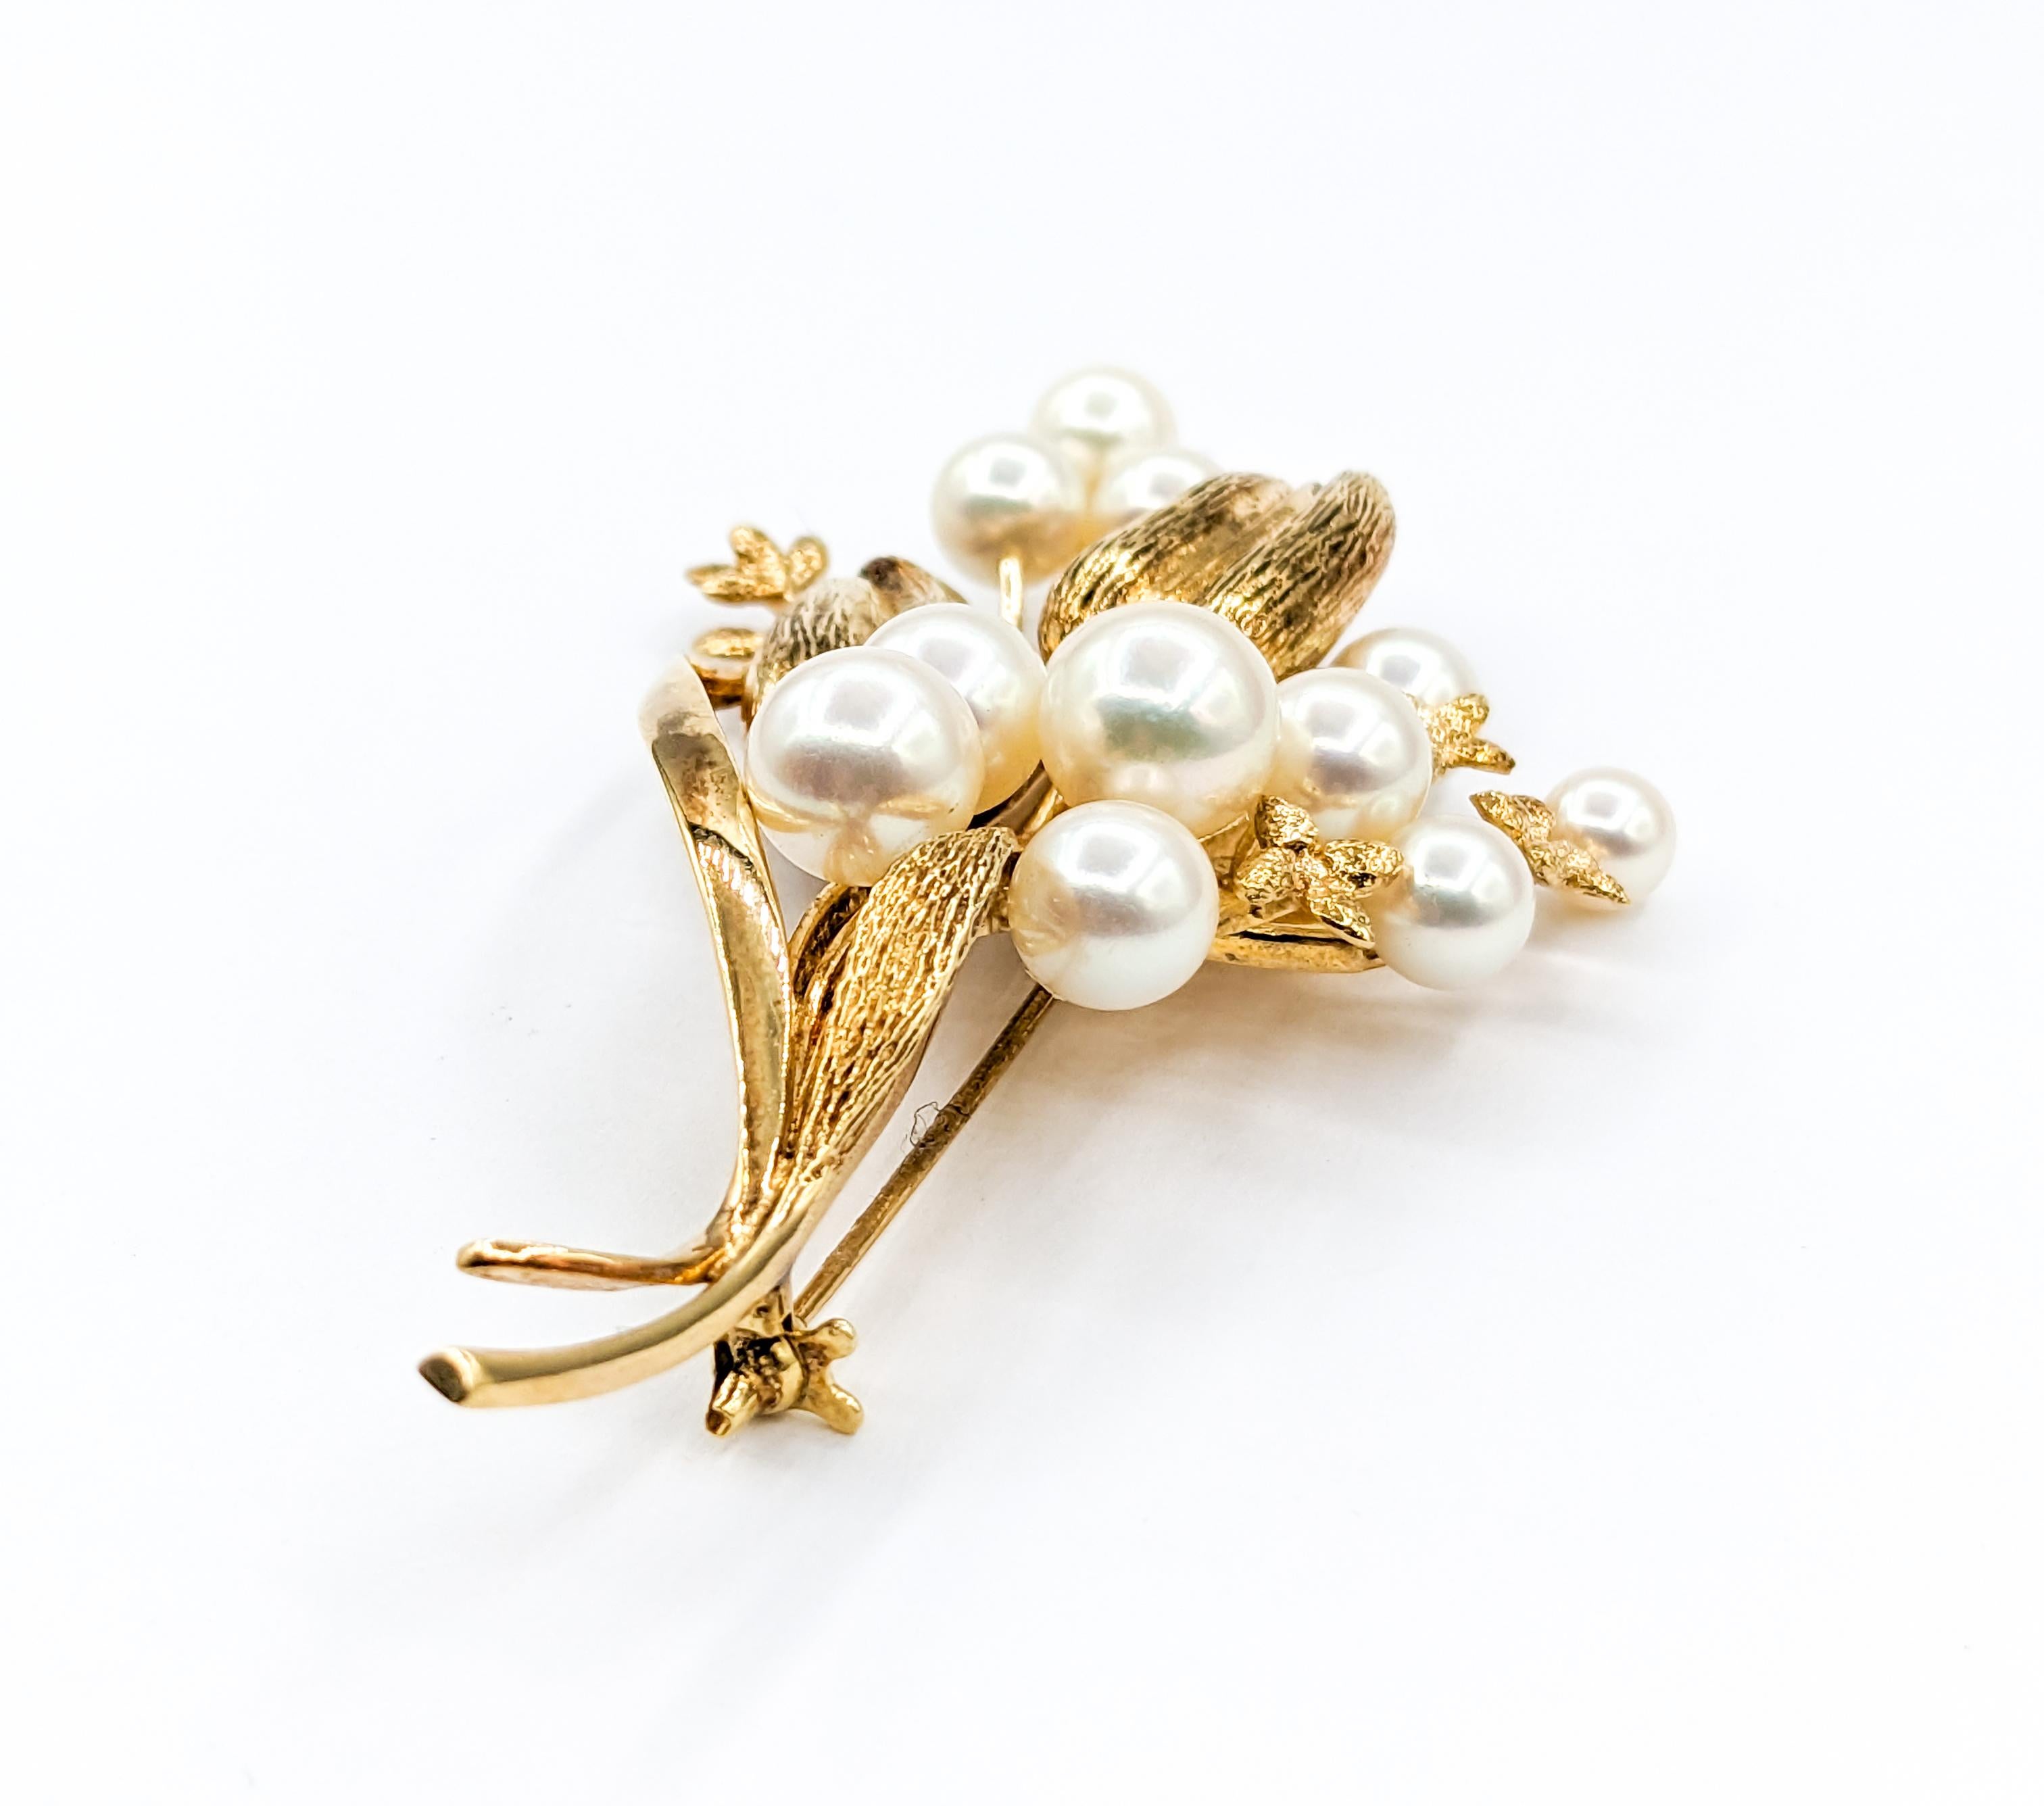 Elegant Mikimoto Brooch Adorned with Akoya Pearls For Sale 3